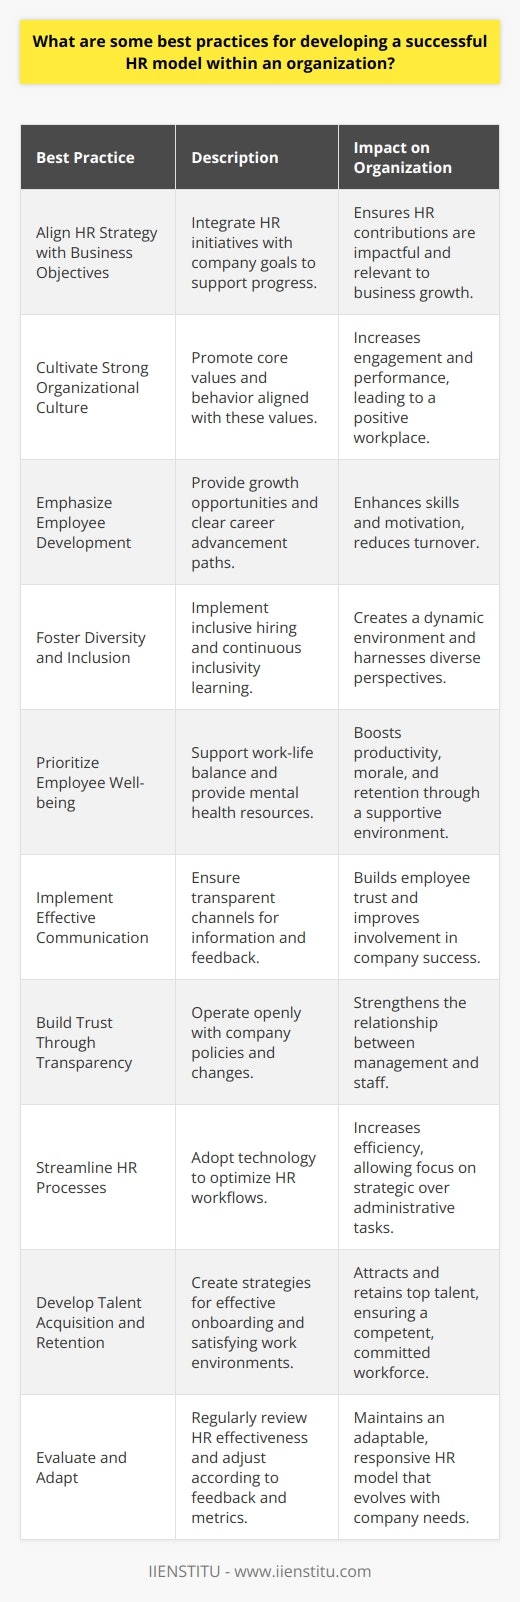 Developing a successful HR model within an organization involves several critical elements that, when executed well, foster a productive and positive workplace culture, driving overall business success. Below are some best practices for crafting such a model:1. Align HR Strategy with Business Objectives: A thriving HR model should mirror and support the company's mission and goals. This strategic alignment helps ensure that HR initiatives contribute constructively to the business's forward momentum.2. Cultivate a Strong Organizational Culture: The HR model should promote a culture that reflects the company's core values. Encouraging behaviors that align with these values will lead to higher engagement and performance levels.3. Emphasize Employee Development: Invest in professional growth opportunities for staff. This includes not only training and educational assistance but also clear paths for career advancement within the organization.4. Foster Diversity and Inclusion: A robust HR strategy commits to building a workforce that values diversity. Inclusive hiring practices and ongoing education around inclusivity can create a vibrant, dynamic work environment where unique perspectives are celebrated.5. Prioritize Employee Well-being: Recognizing that employees are the most valuable asset leads to policies that support their well-being, including work-life balance, mental health resources, and a supportive work environment.6. Implement Effective Communication: Establish clear communication channels to keep employees informed and involved. Ensure that employees feel heard and that their feedback is valued and considered.7. Build Trust Through Transparency: A successful HR model operates with a high level of transparency regarding company policies, changes, and expectations to build trust between management and employees.8. Streamline HR Processes: Utilize technology and best practices to create efficient HR processes that save time and reduce errors, allowing HR teams to focus on strategic initiatives over administrative tasks.9. Develop a Robust Talent Acquisition and Retention Strategy: A forward-thinking HR model not only attracts top talent but also fosters a harmonious environment that encourages retention. Employee onboarding programs and retention strategies should be designed to integrate new hires effectively and keep existing employees satisfied and committed.10. Evaluate and Adapt: Continuously assess the effectiveness of the HR model through various metrics and employee feedback. Be ready to make data-driven adjustments as necessary in response to the evolving needs of the organization and its workforce.By following these best practices, HR professionals within an organization can craft a strong HR model tailored to support the company's specific needs, enhance employee satisfaction, and drive business success. This balanced approach combines strategic planning with a commitment to employee engagement and well-being, which are integral components of any successful organization.